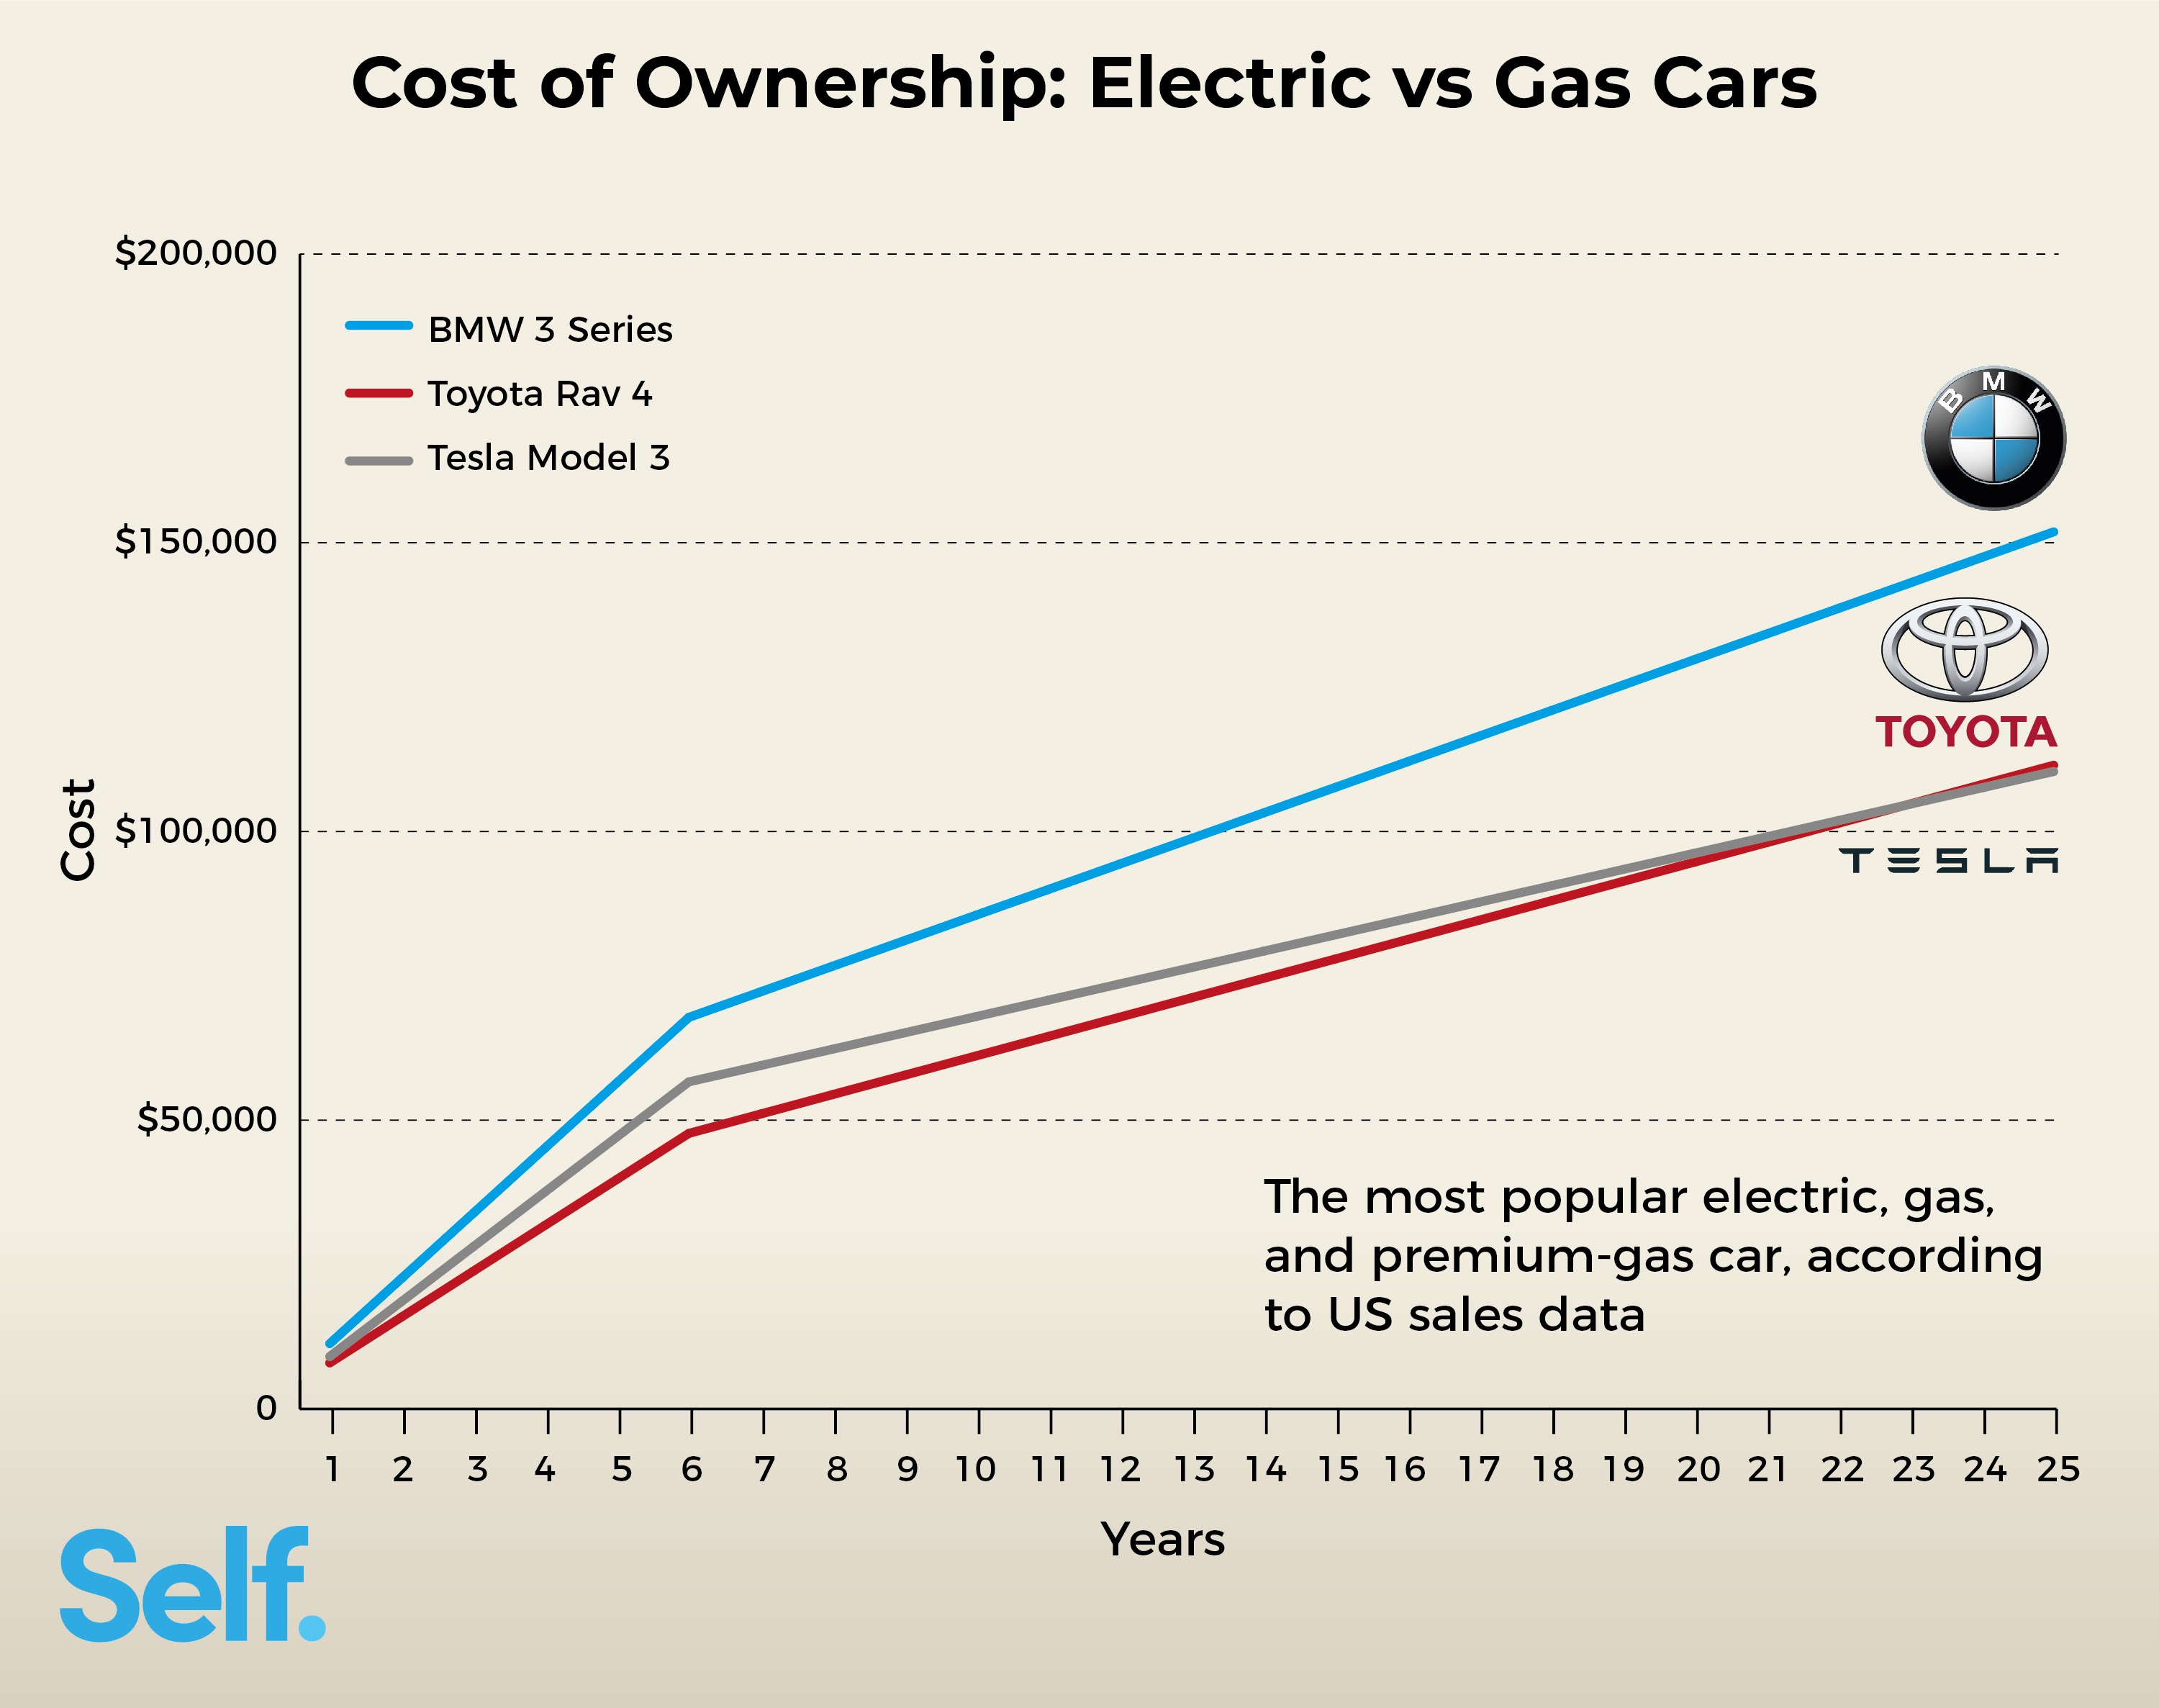 Electric Vehicles Cost 634 Less To Run Per Year Greenmoxie™